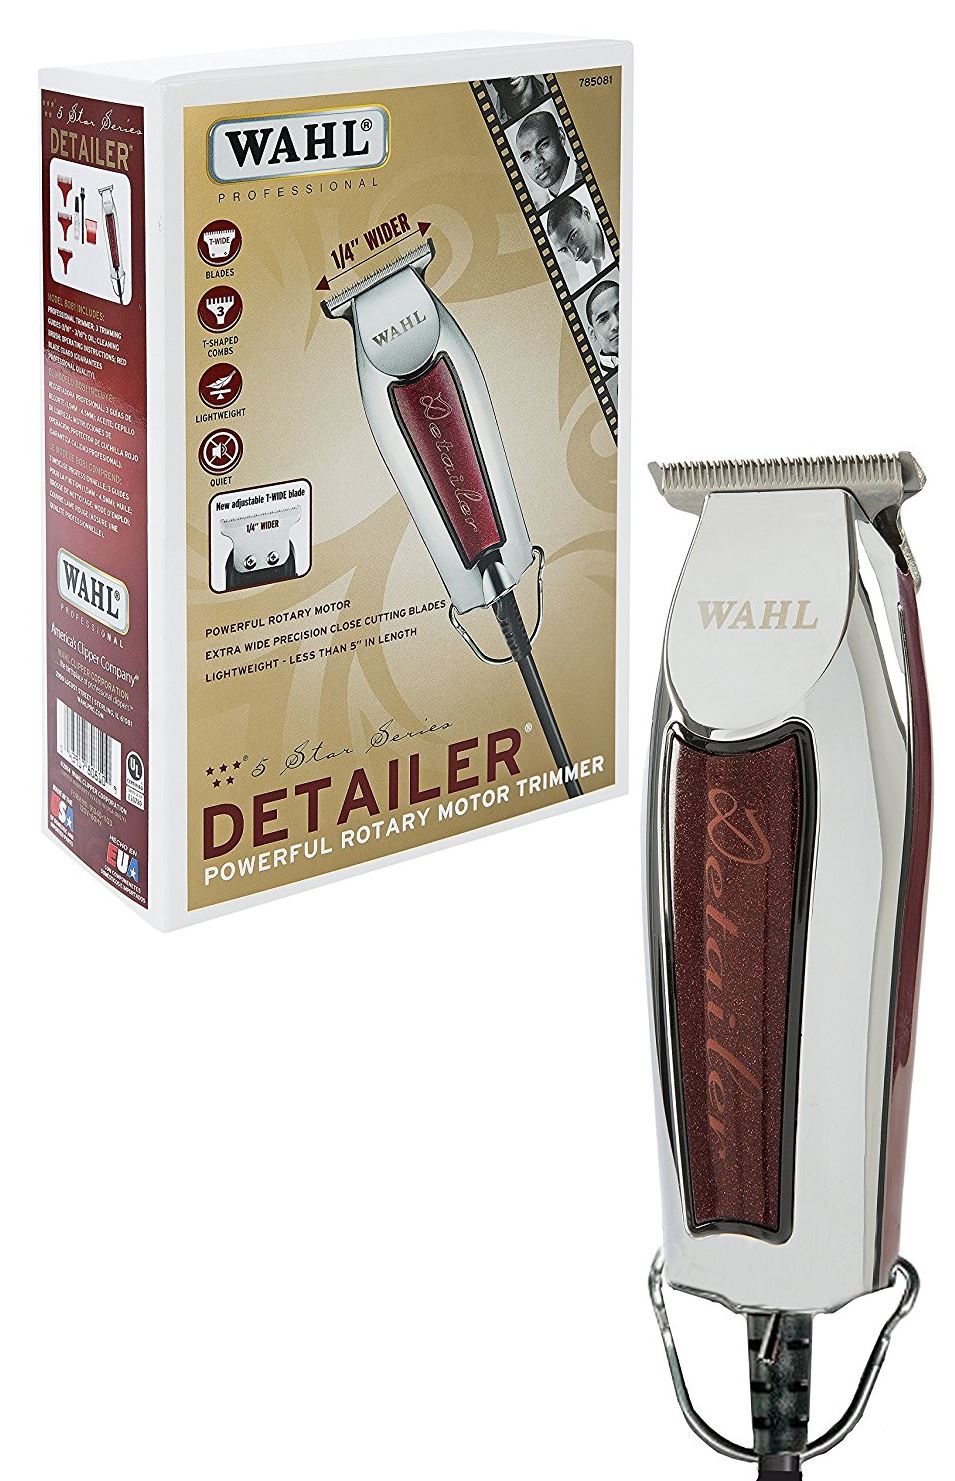 Wahl Detailer Review Featured Image